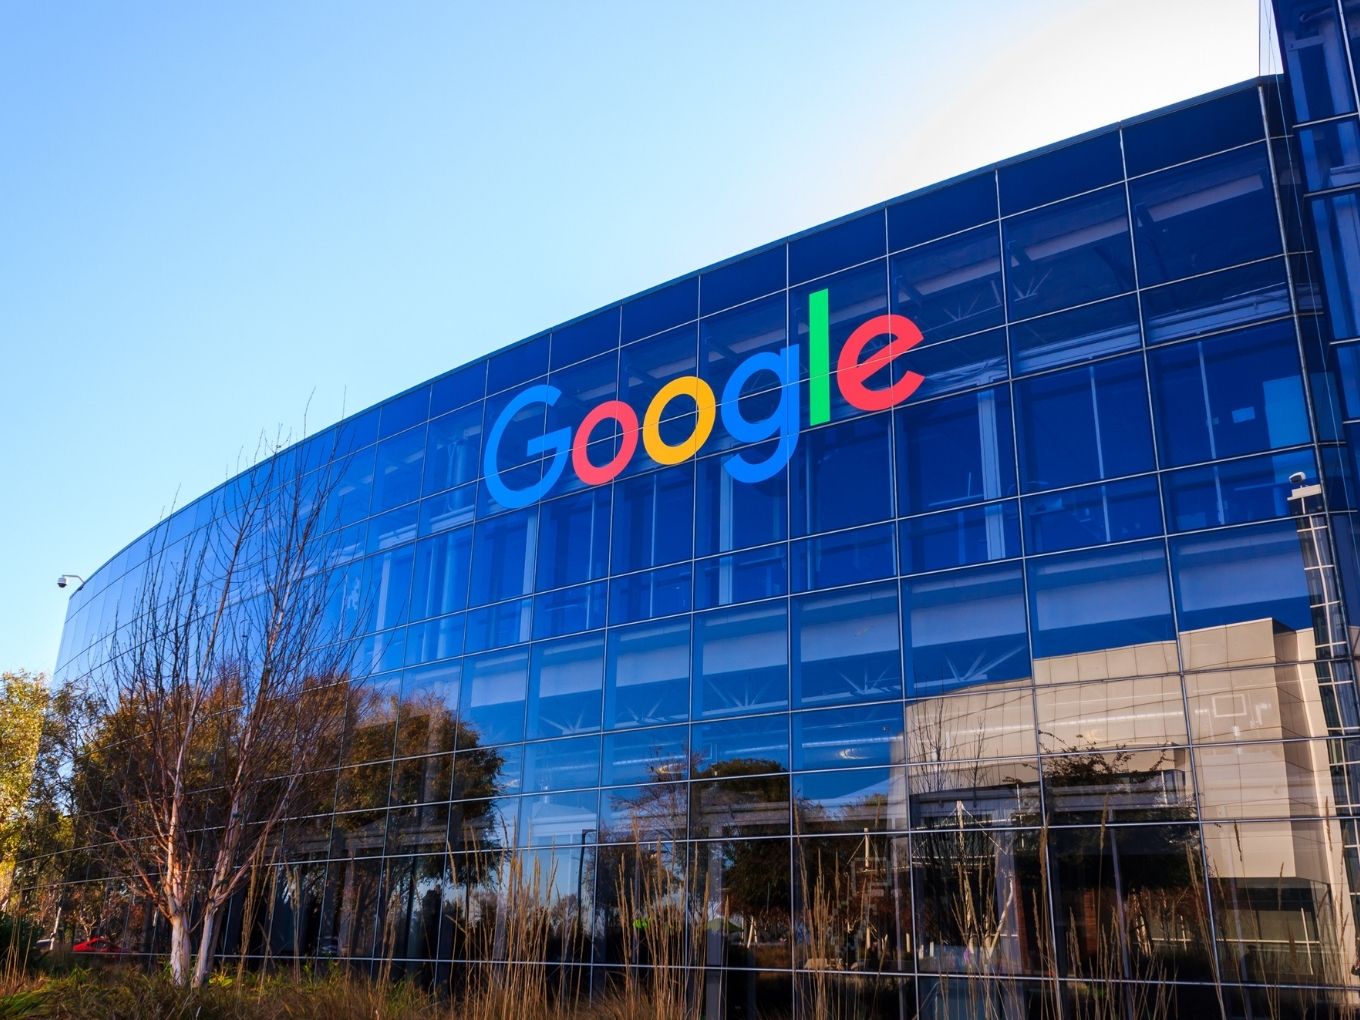 The Competition Commission of India (CCI) has ordered fresh investigations on tech giant Google for allegedly abusing its dominance in news aggregation, according to media reports.  This order follows allegations made against Google by the Digital News Publishers Association (DNPA), an industry body that primarily consists of legacy media houses operating into the digital media space.